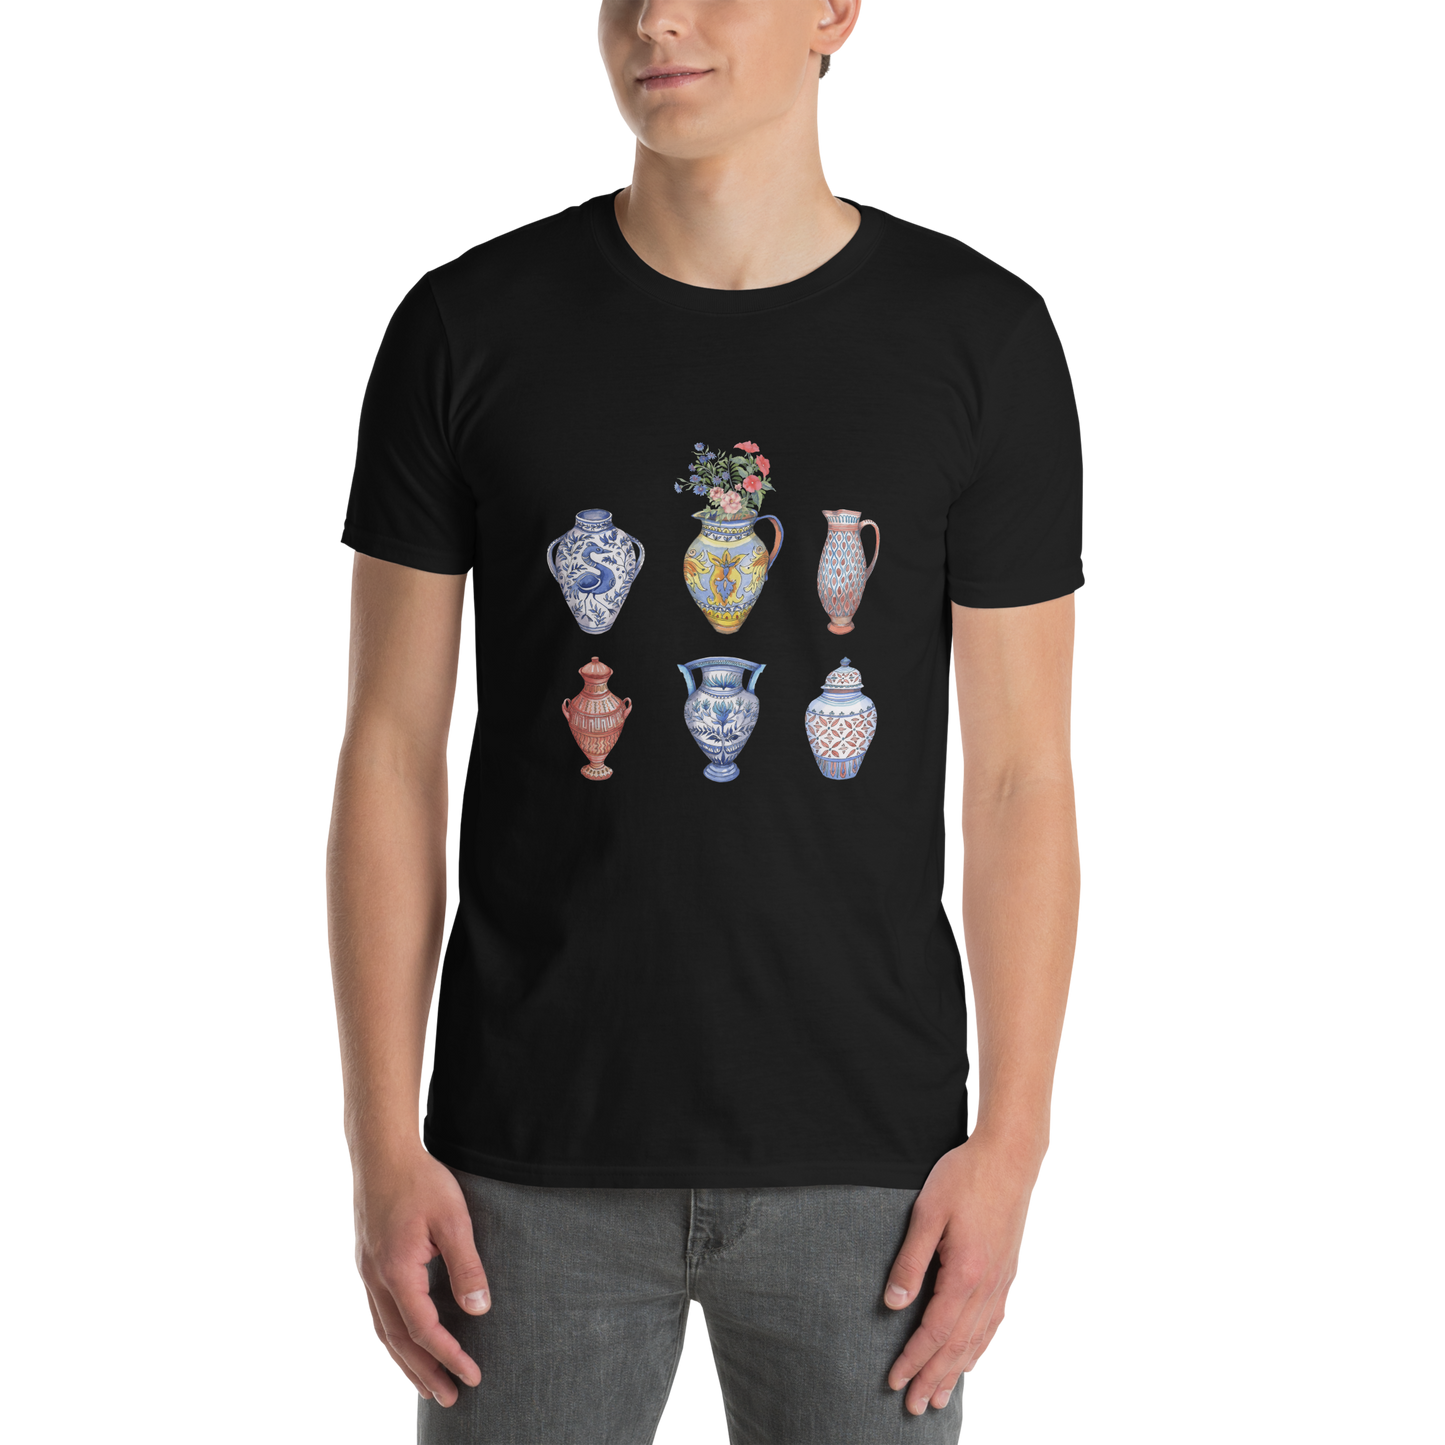 Man wearing a Black Vase T-Shirt featuring a chic vase graphic on the chest - Artsy Graphic Vase T-Shirts - Boozy Fox